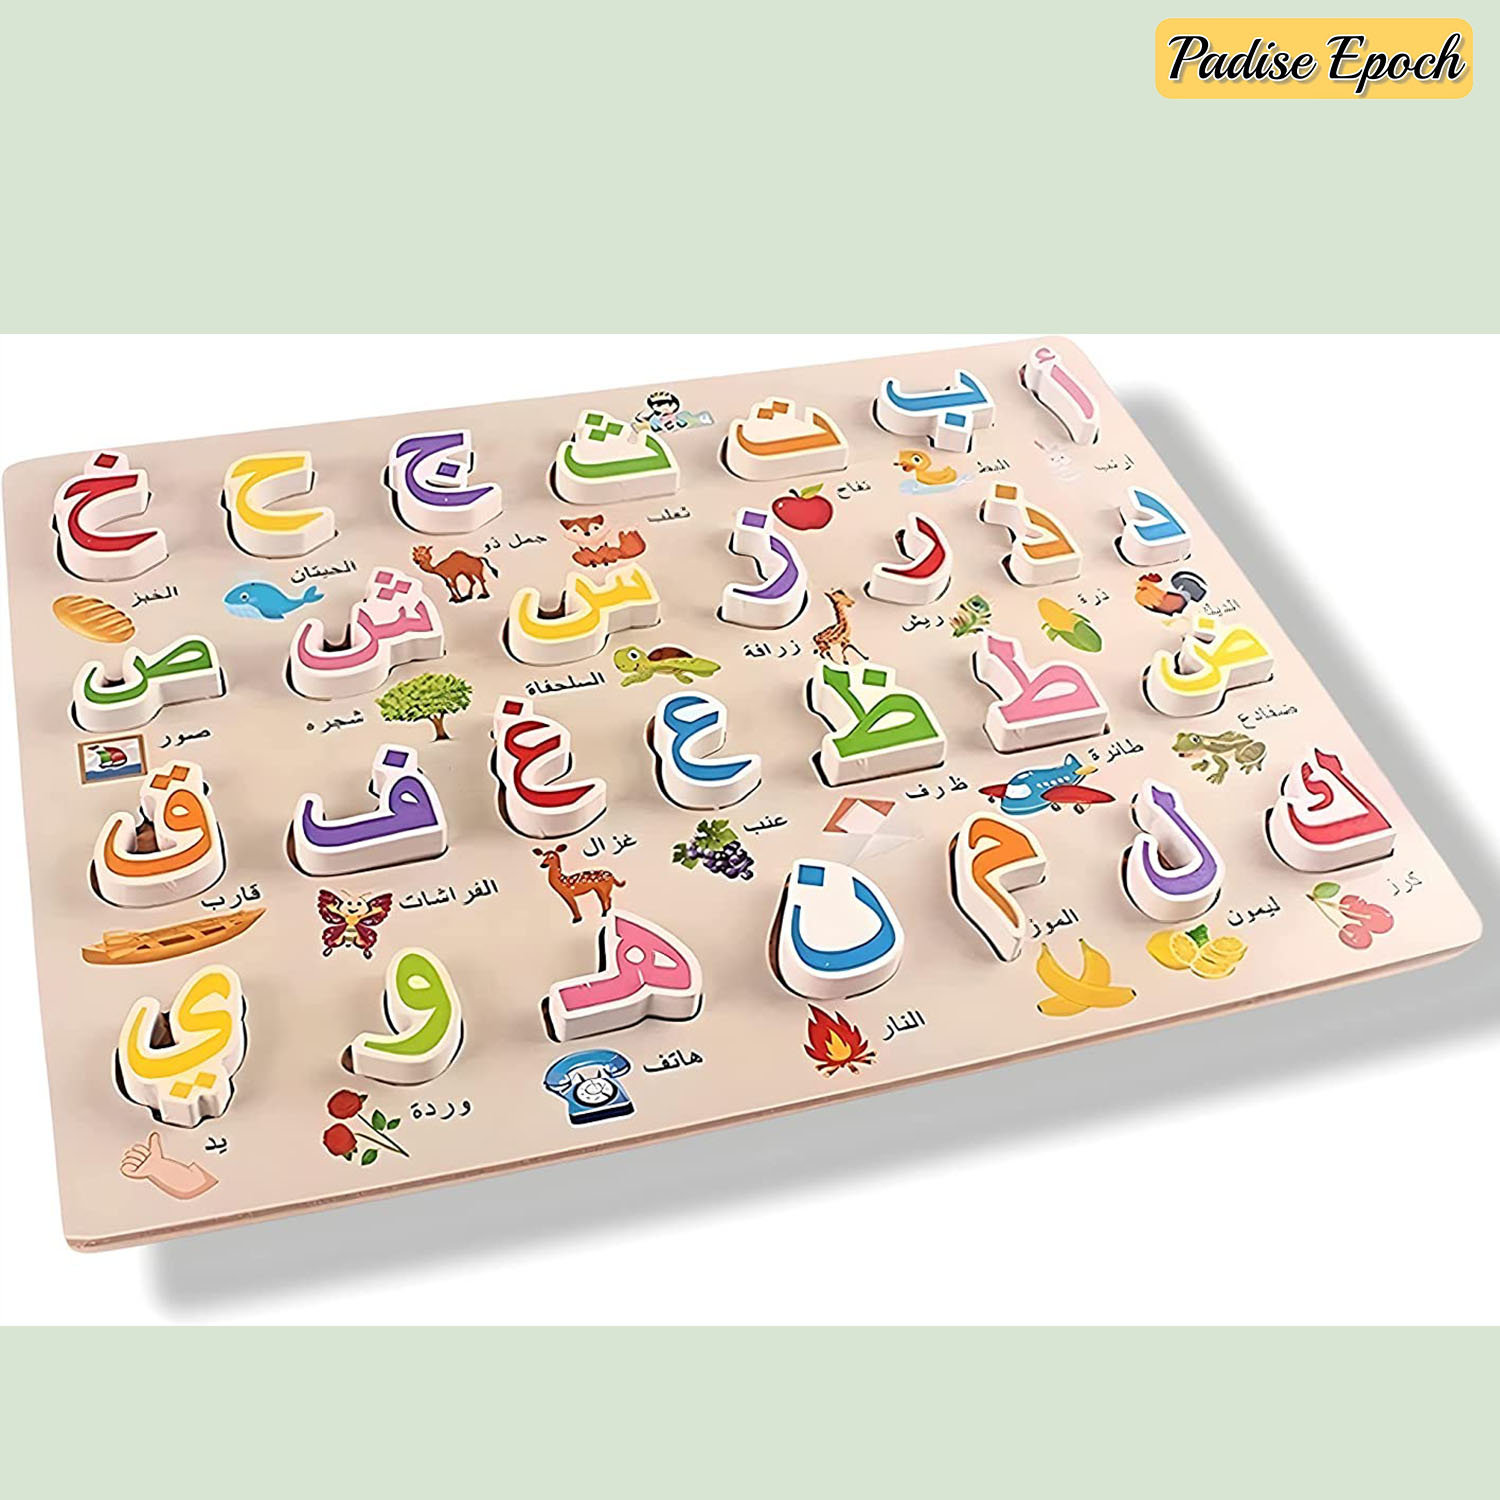 Padise Epoch Arabic Alphabet Puzzle - 100% Wooden Board - Objects/Animals  Names - The Perfect Arabe Culture - Islamic Eid Gift - Arabic Language - 3D  Letters - Wayfair Canada